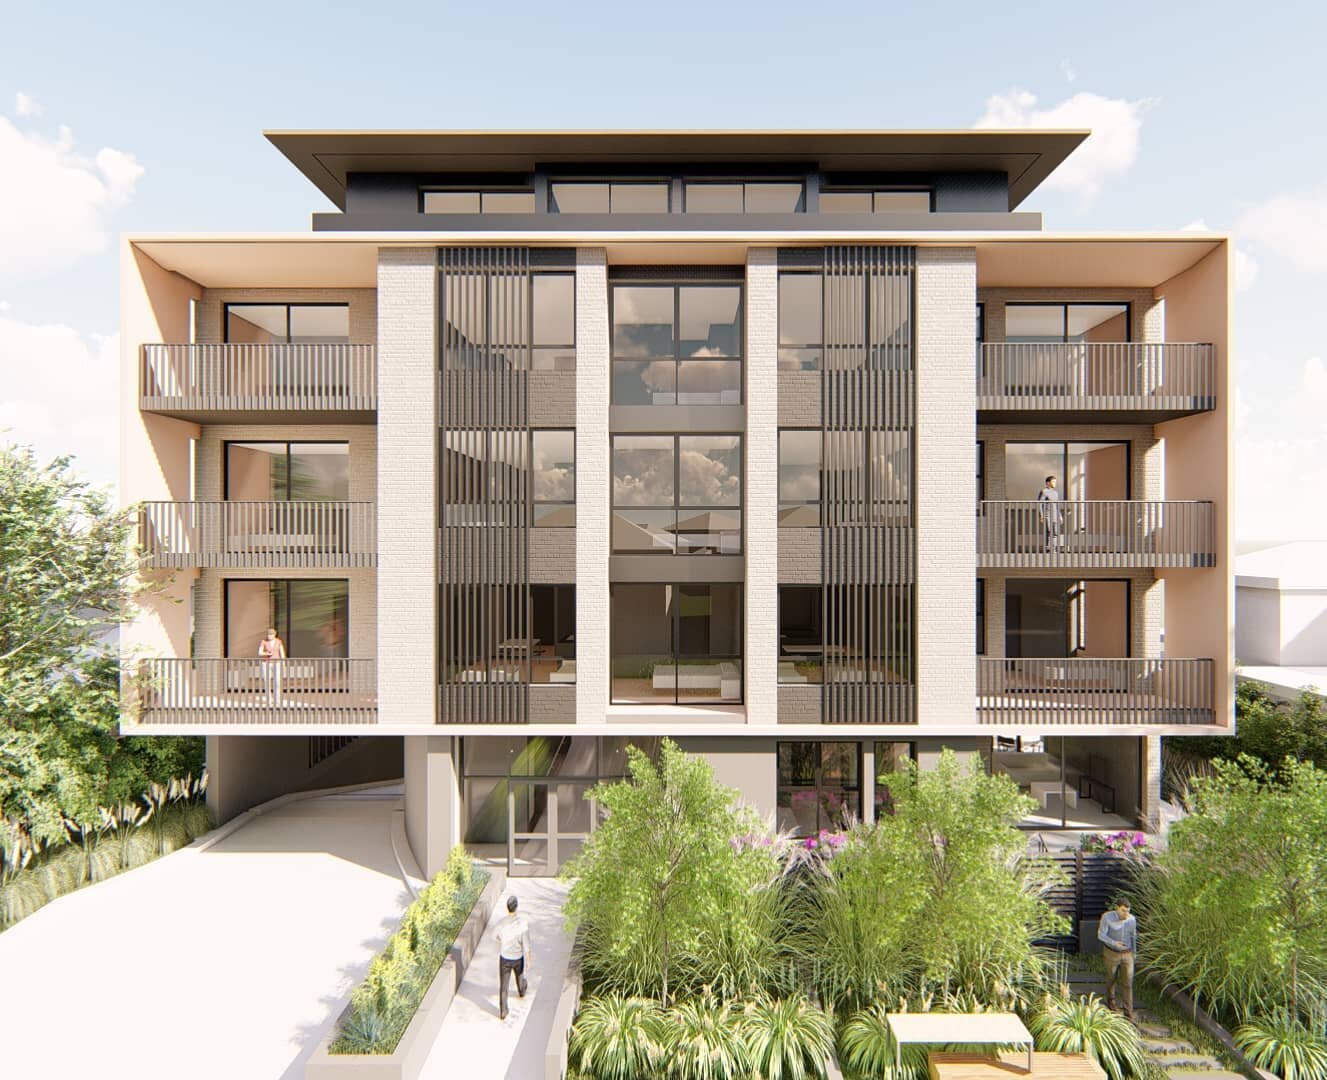 Another fantastic residential project coming soon, strong volumes and geometry combine with the luxury of high ceilings, generous spaces, premium finishes and stunning views. 
Looking forward to delivering this project alongside @masterfieldgroup 

#